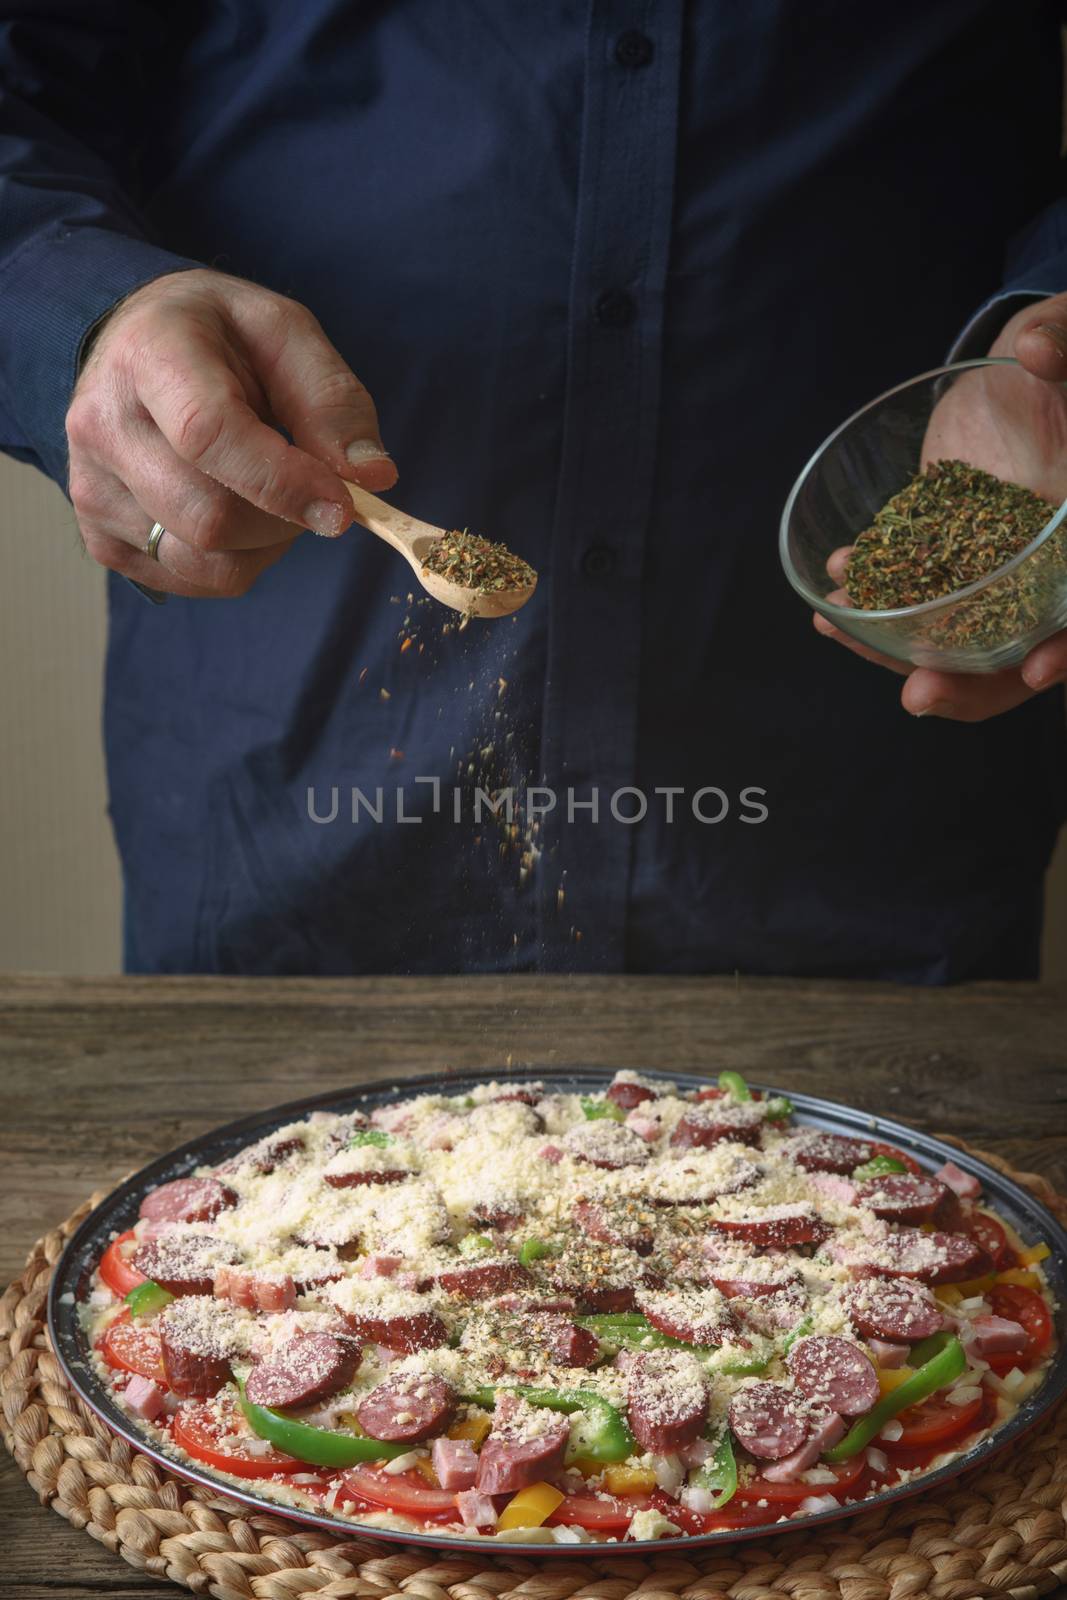 Man in a blue shirt sprinkle with spice pizza from a glass sauser vertical